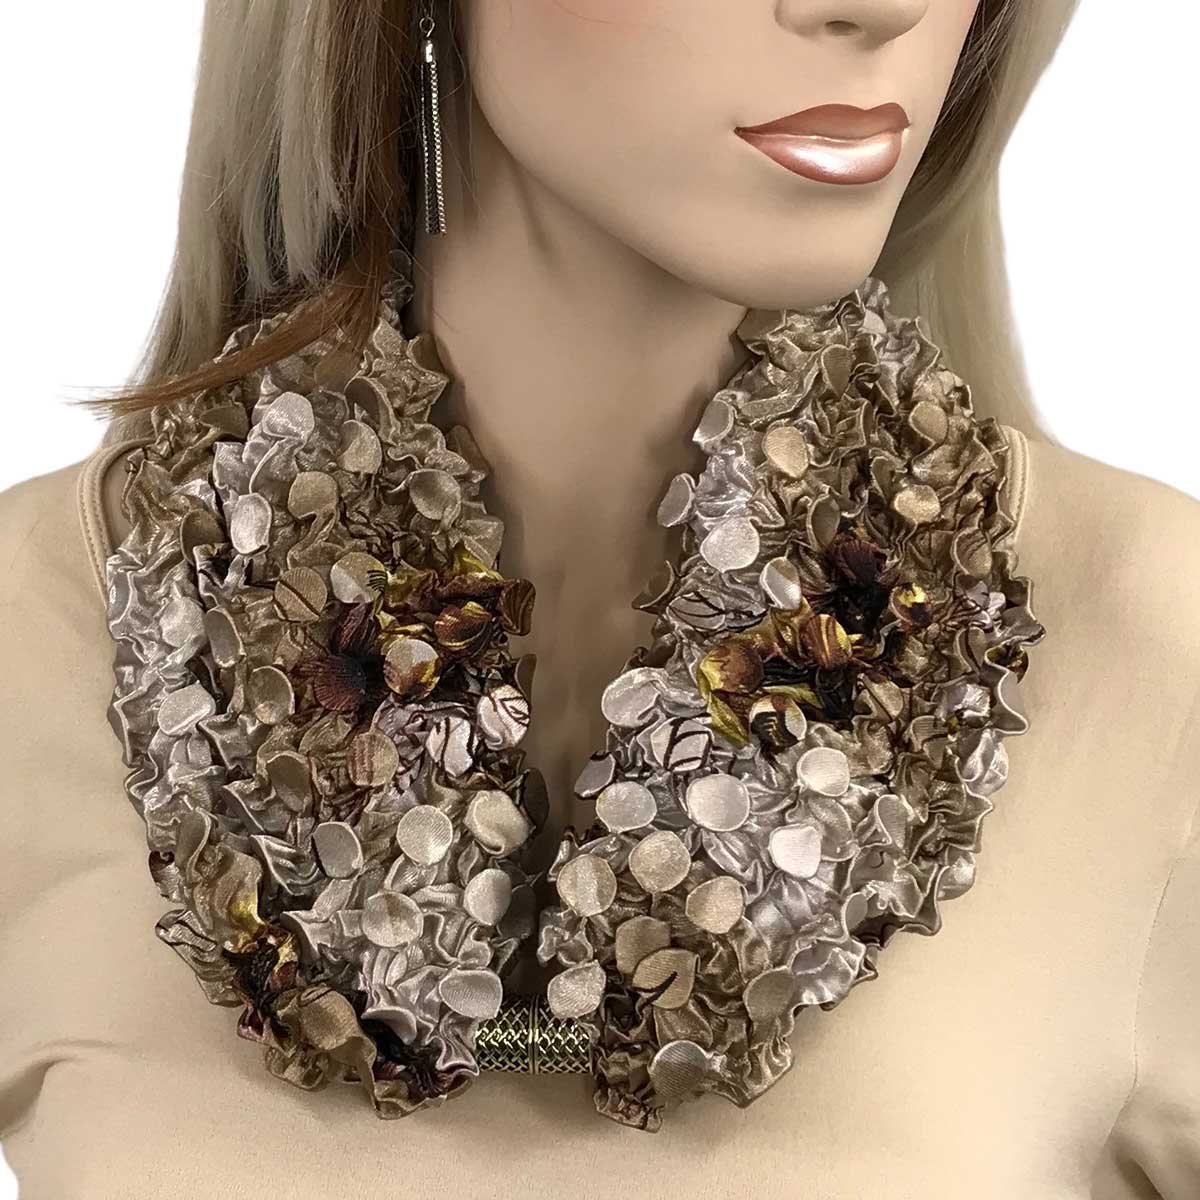 Magnetic Clasp Scarves - Coin + Bubble Satin 3302 #23 CARNATION Magnetic Clasp Scarf - Bubble Satin - 